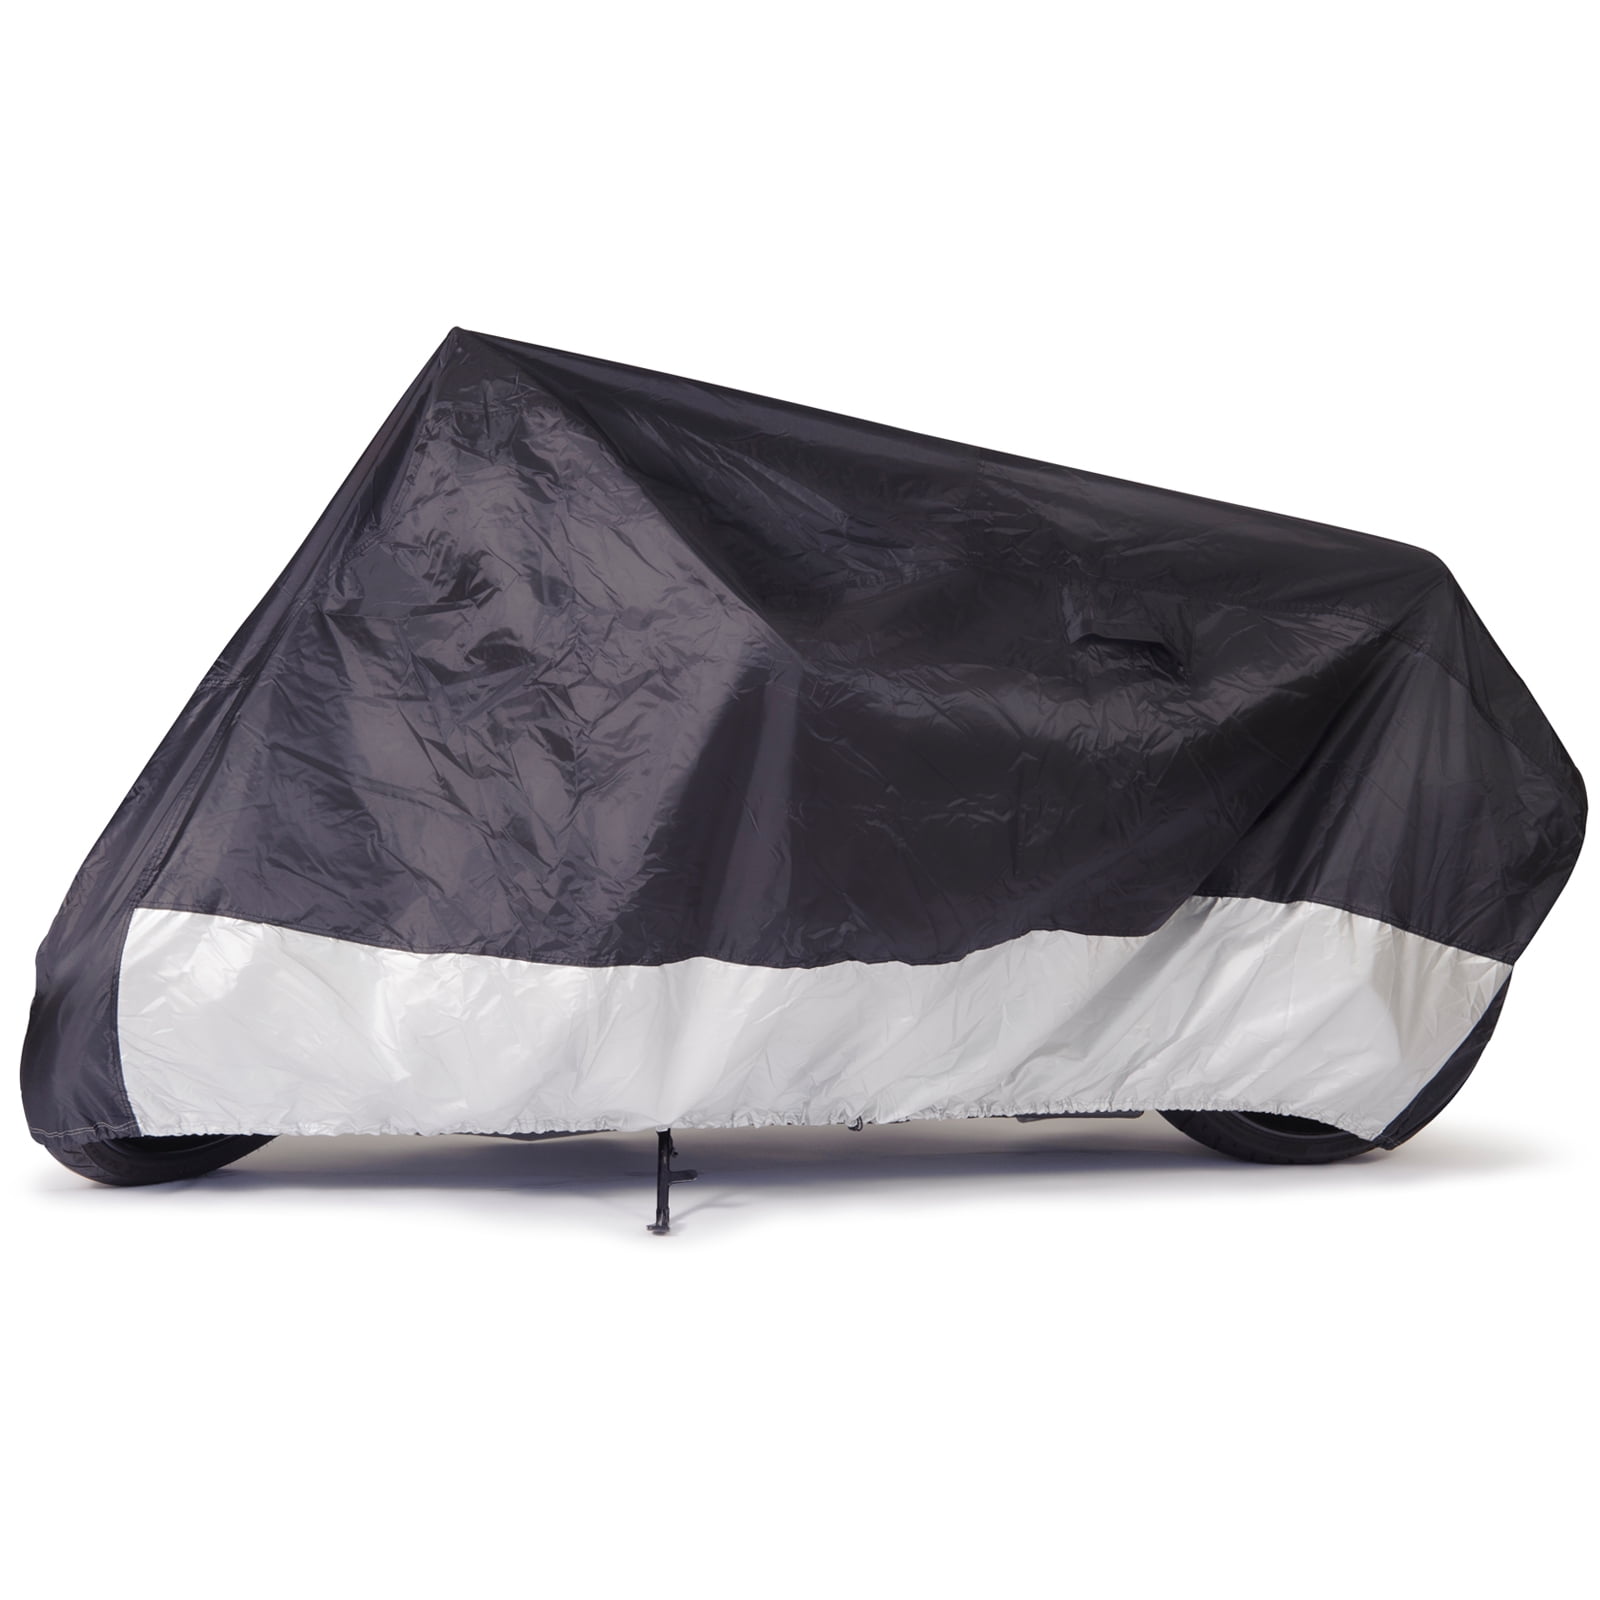 folding motorcycle cover